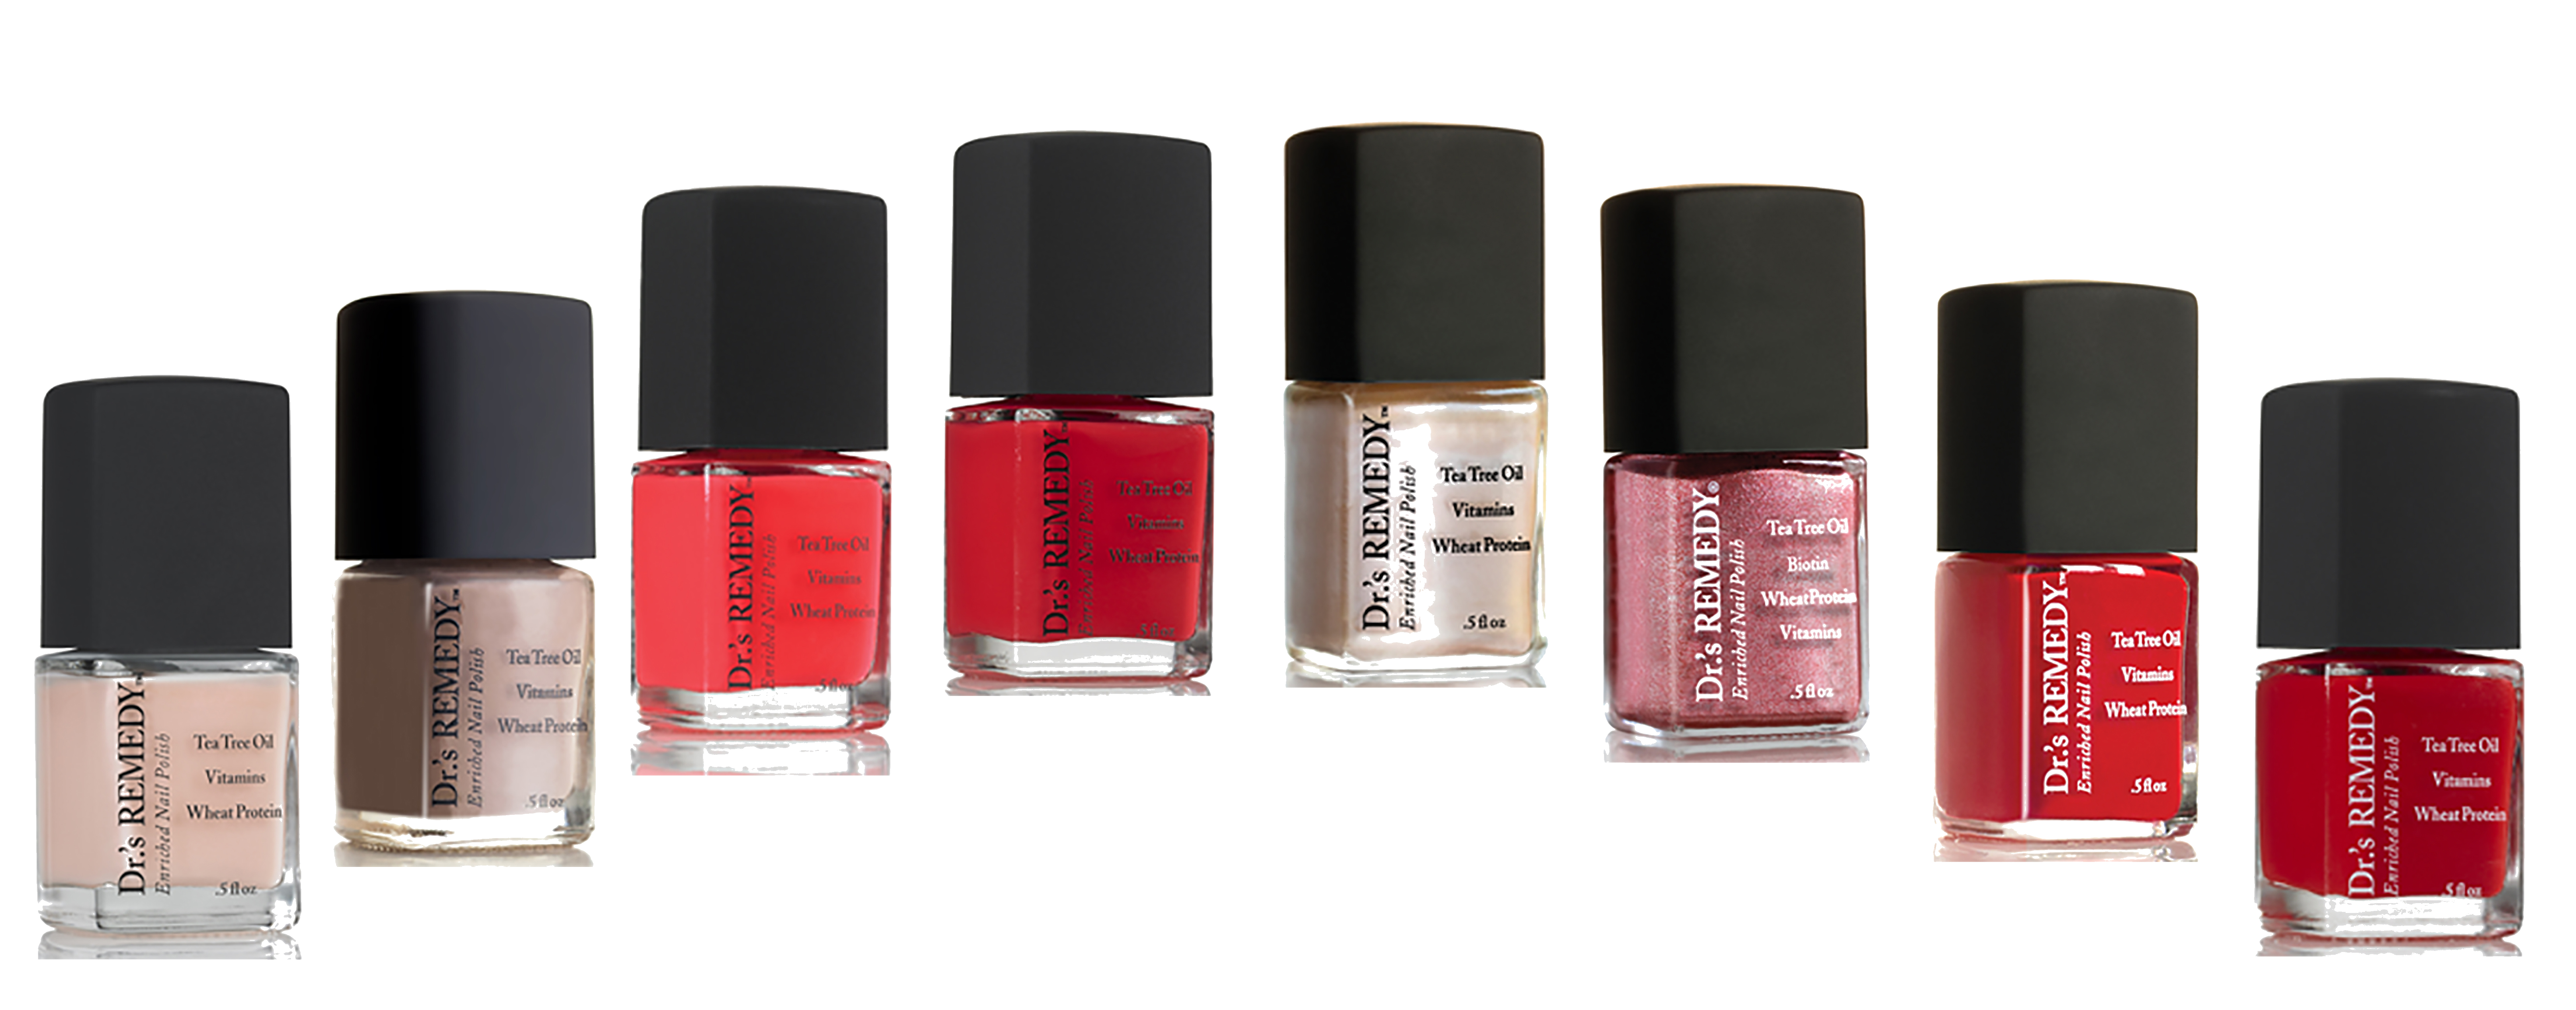 Dr. Remedy Nail Polish Colors - wide 6